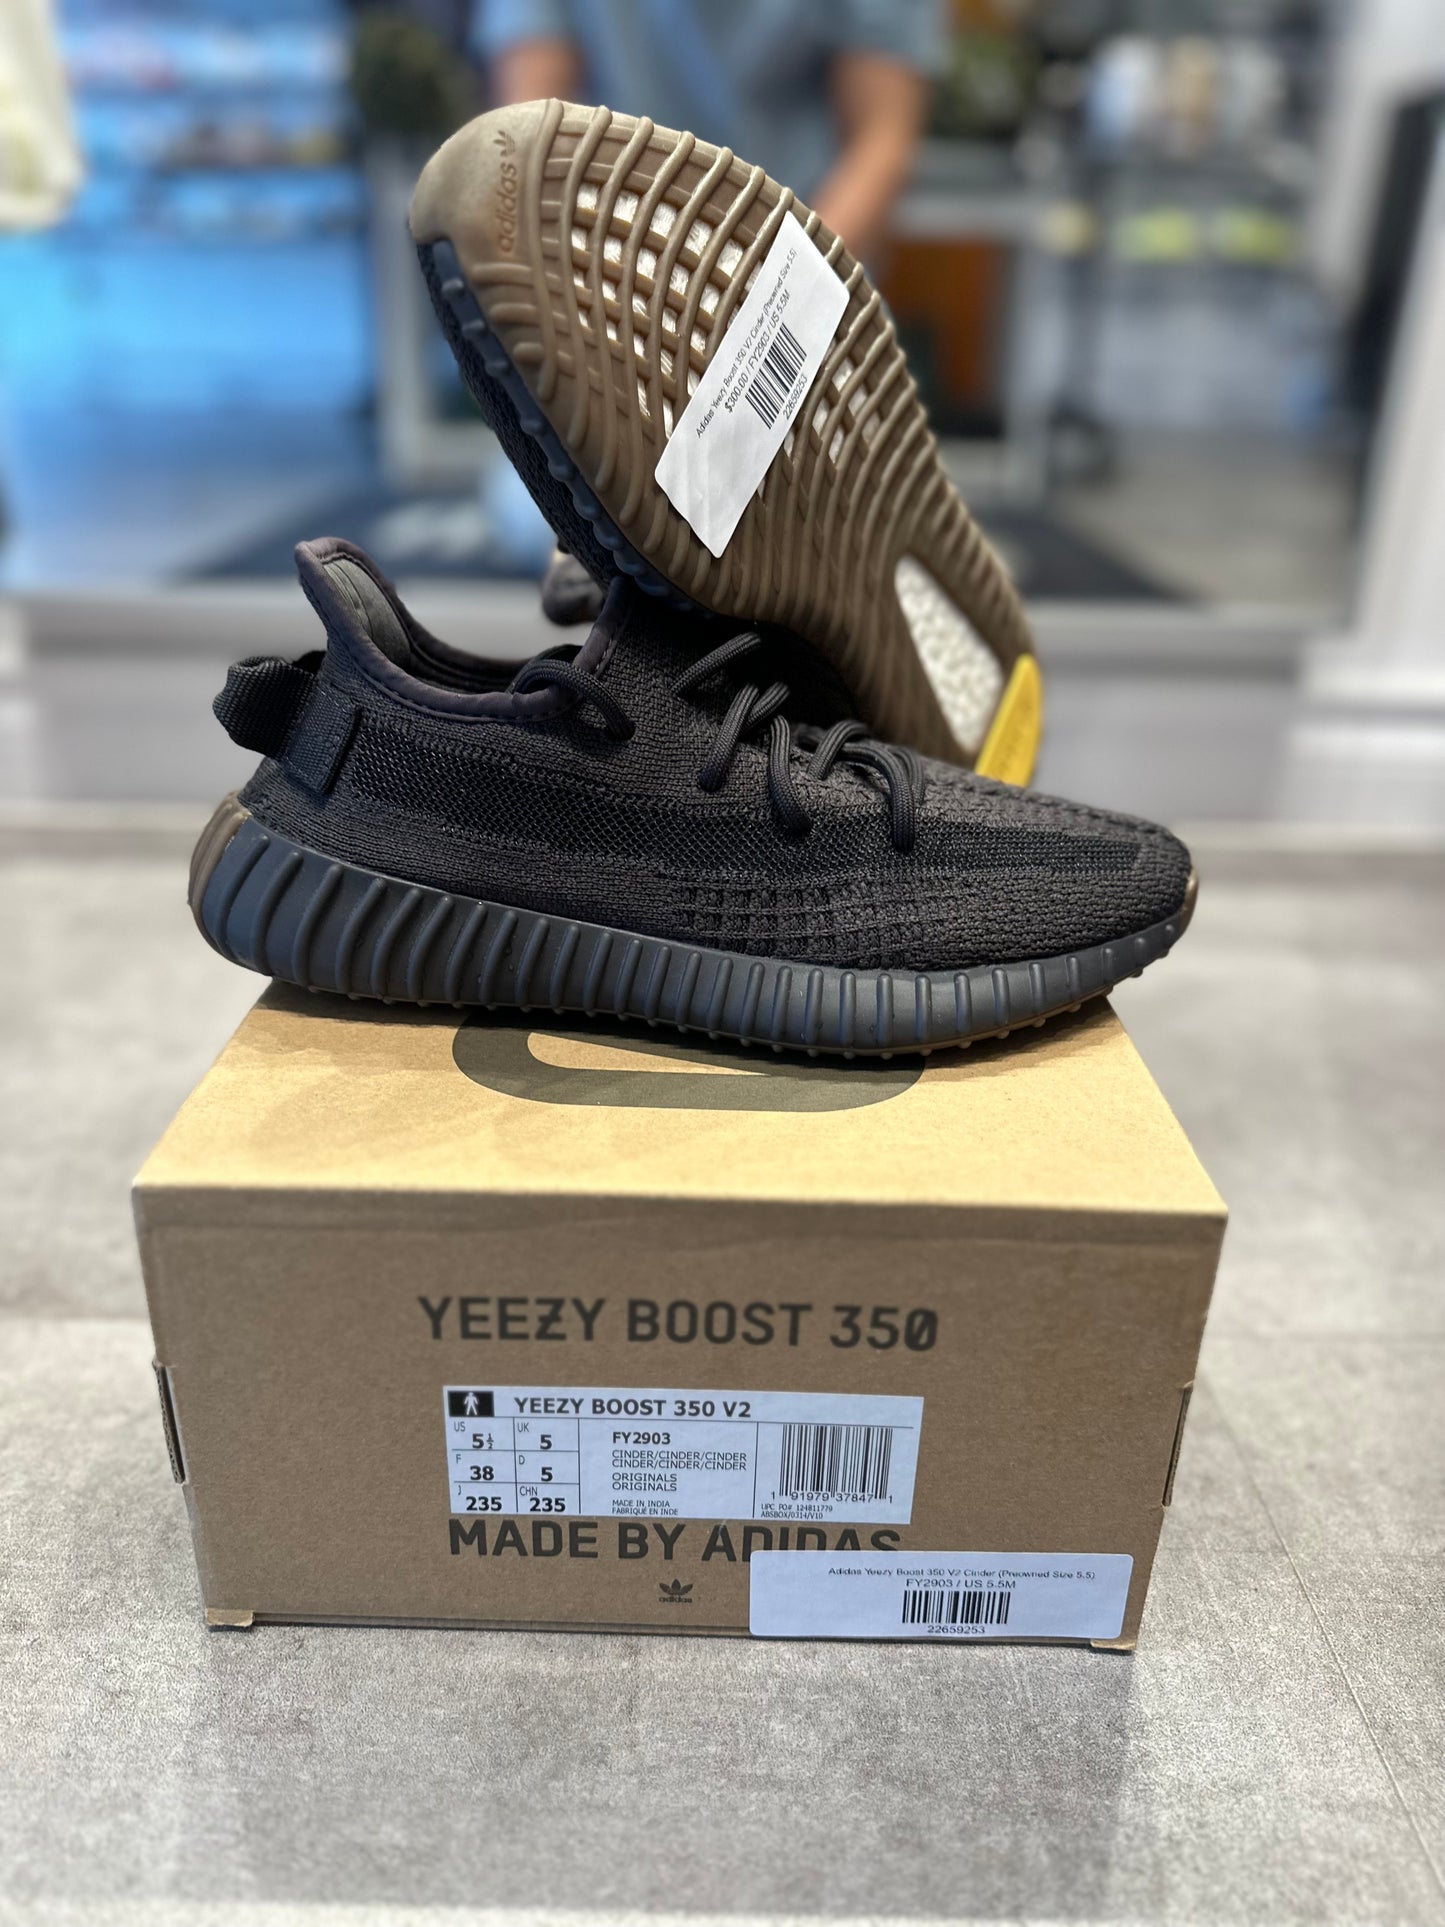 Adidas Yeezy Boost 350 V2 Cinder (Preowned Size 5.5)